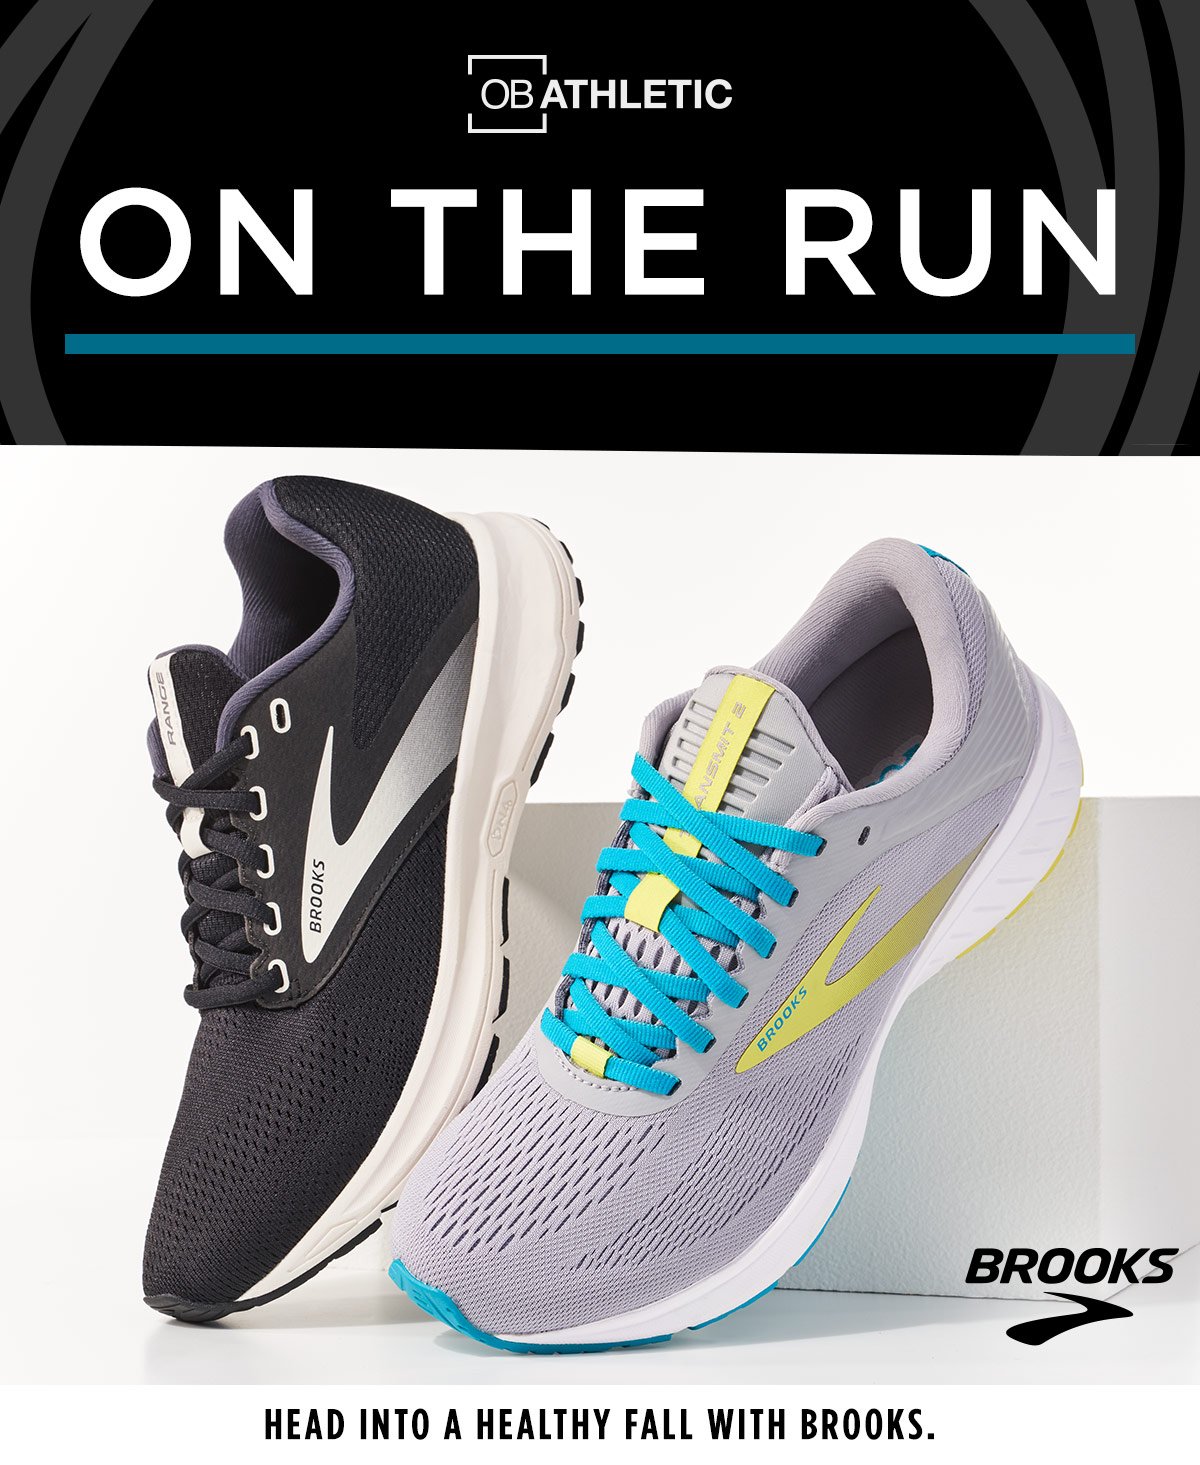 ON THE RUN! HEAD INTO FALL WITH BROOKS. SHOP B&W AND GRAY & NEON SNEAKERS